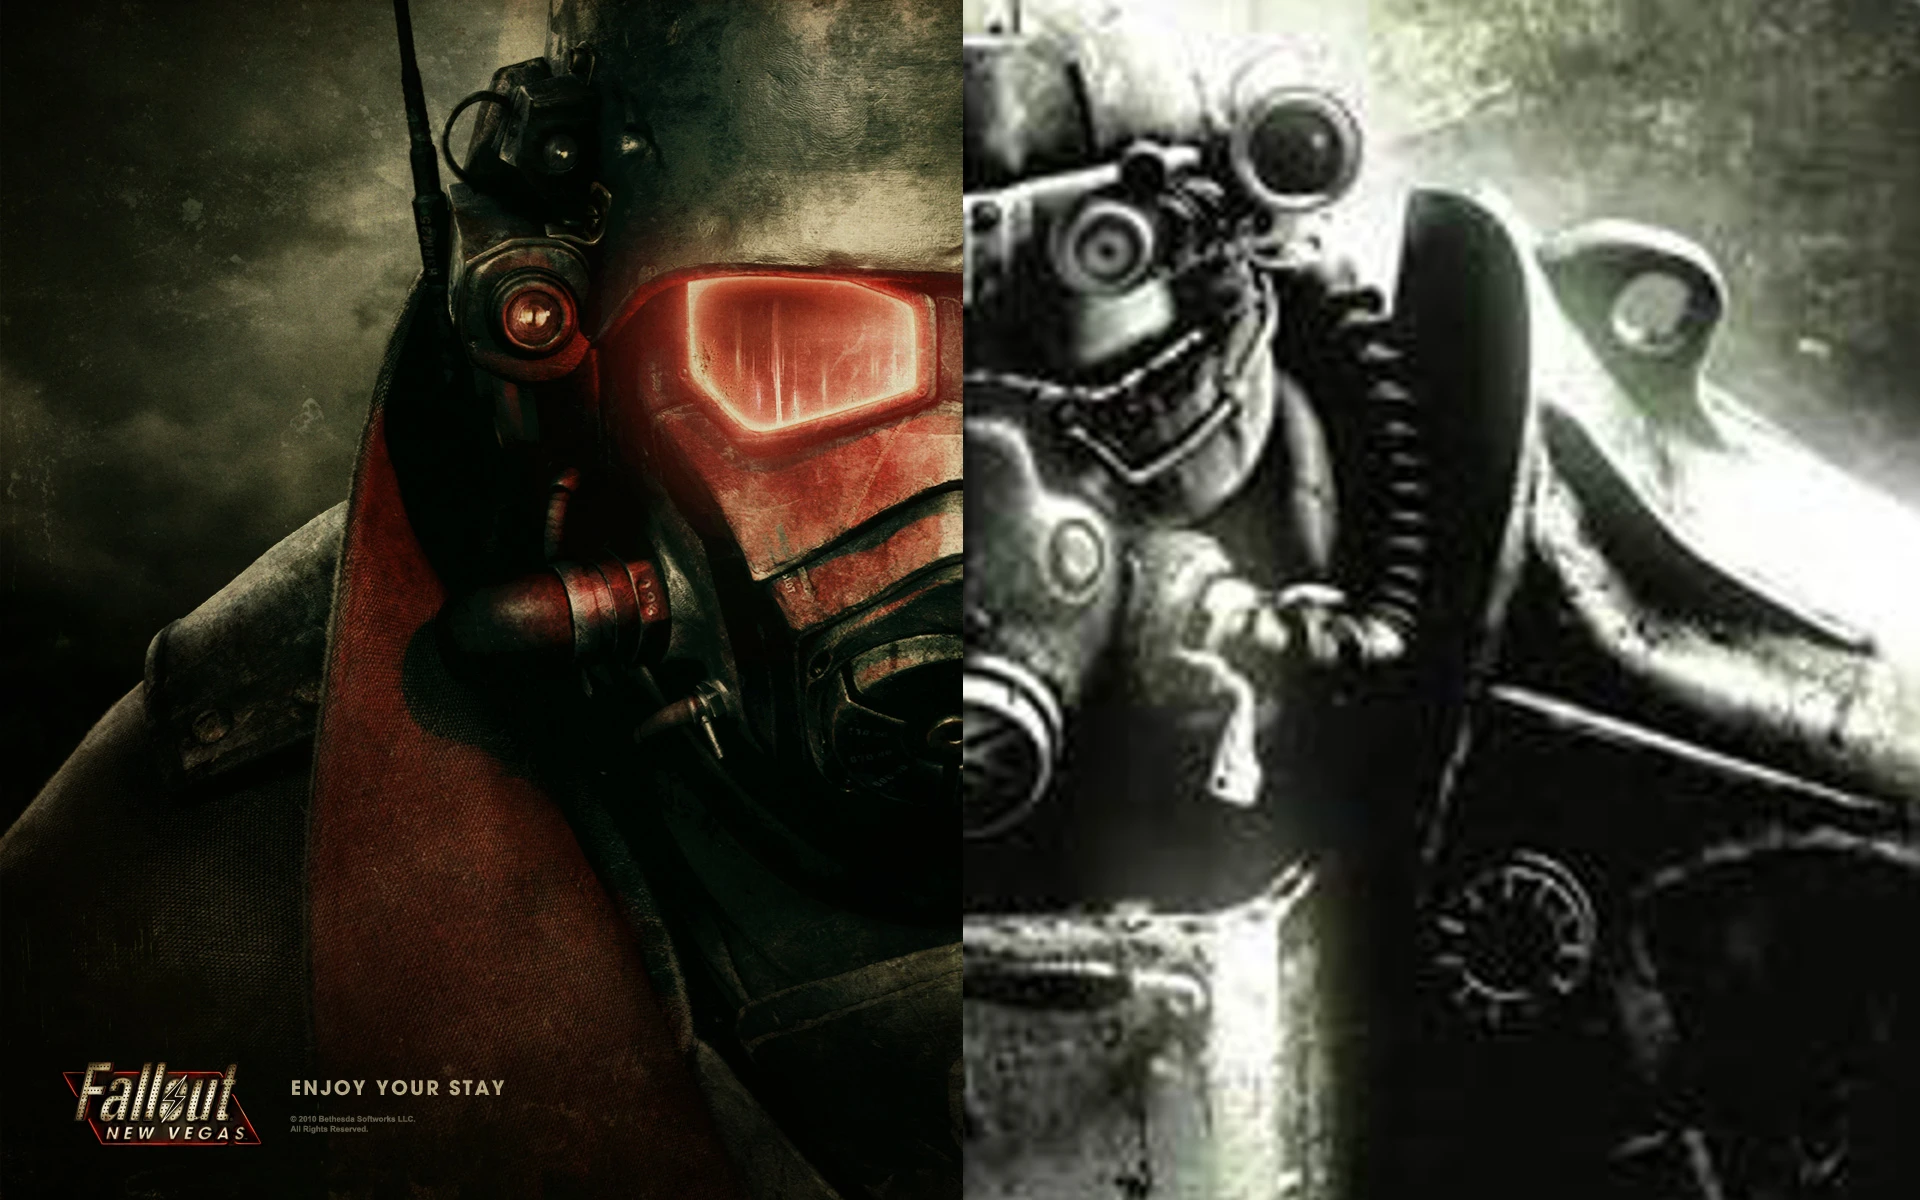 fallout tale of 2 wastelands